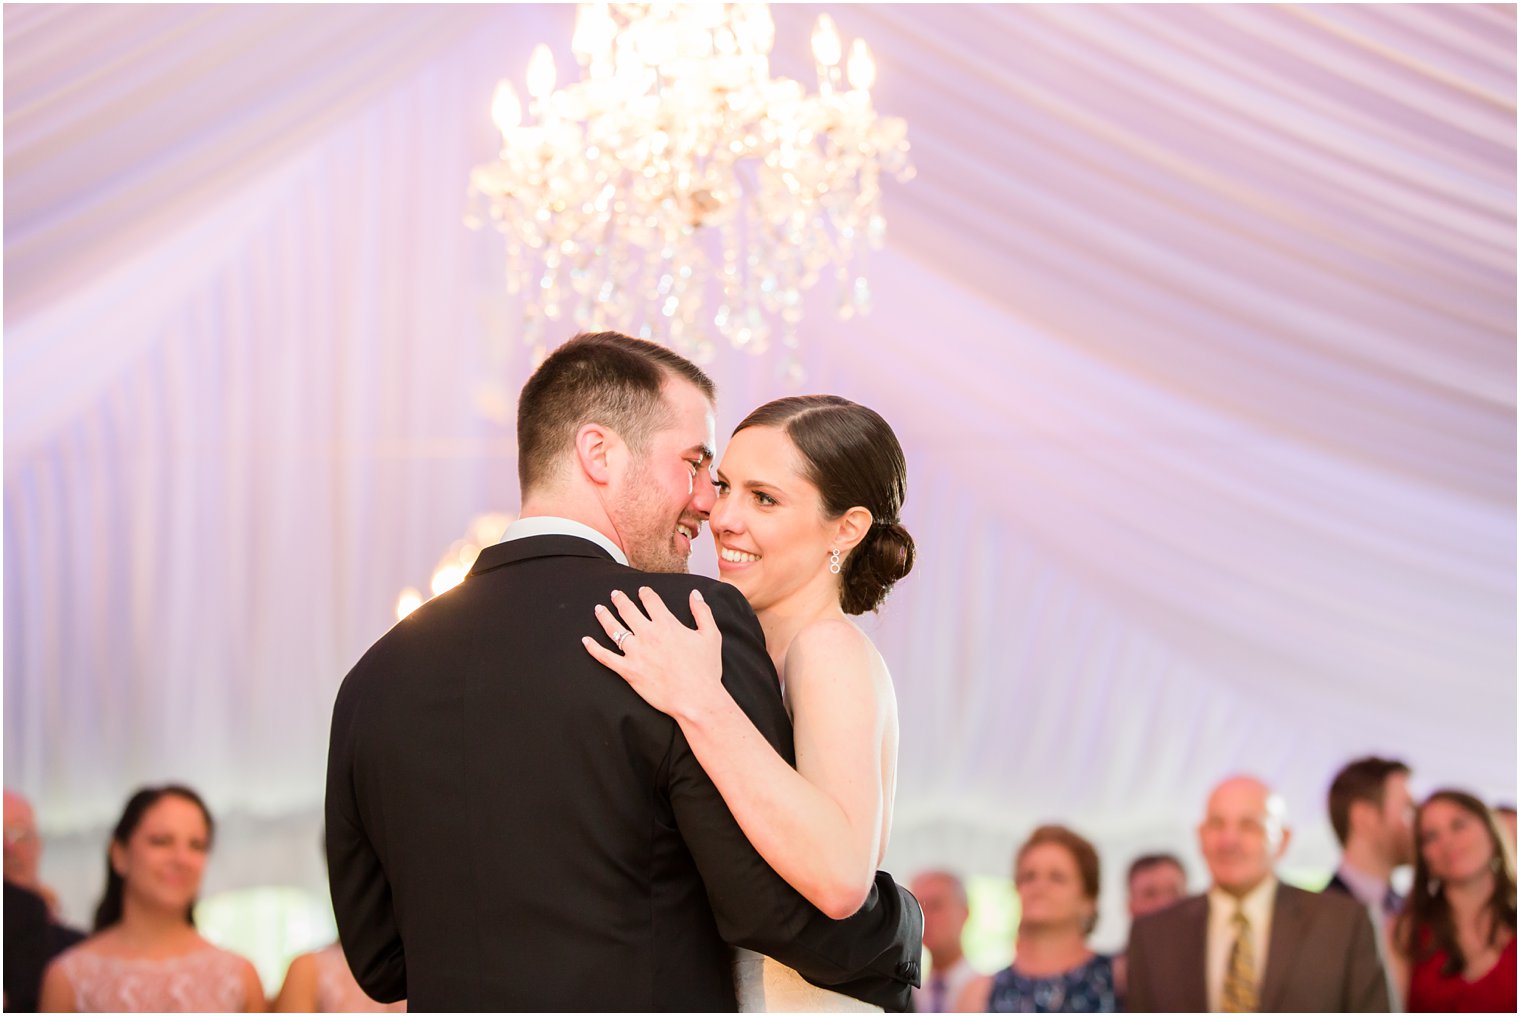 First dance photo | Windows on the Water at Frogbridge | Photos by Idalia Photography